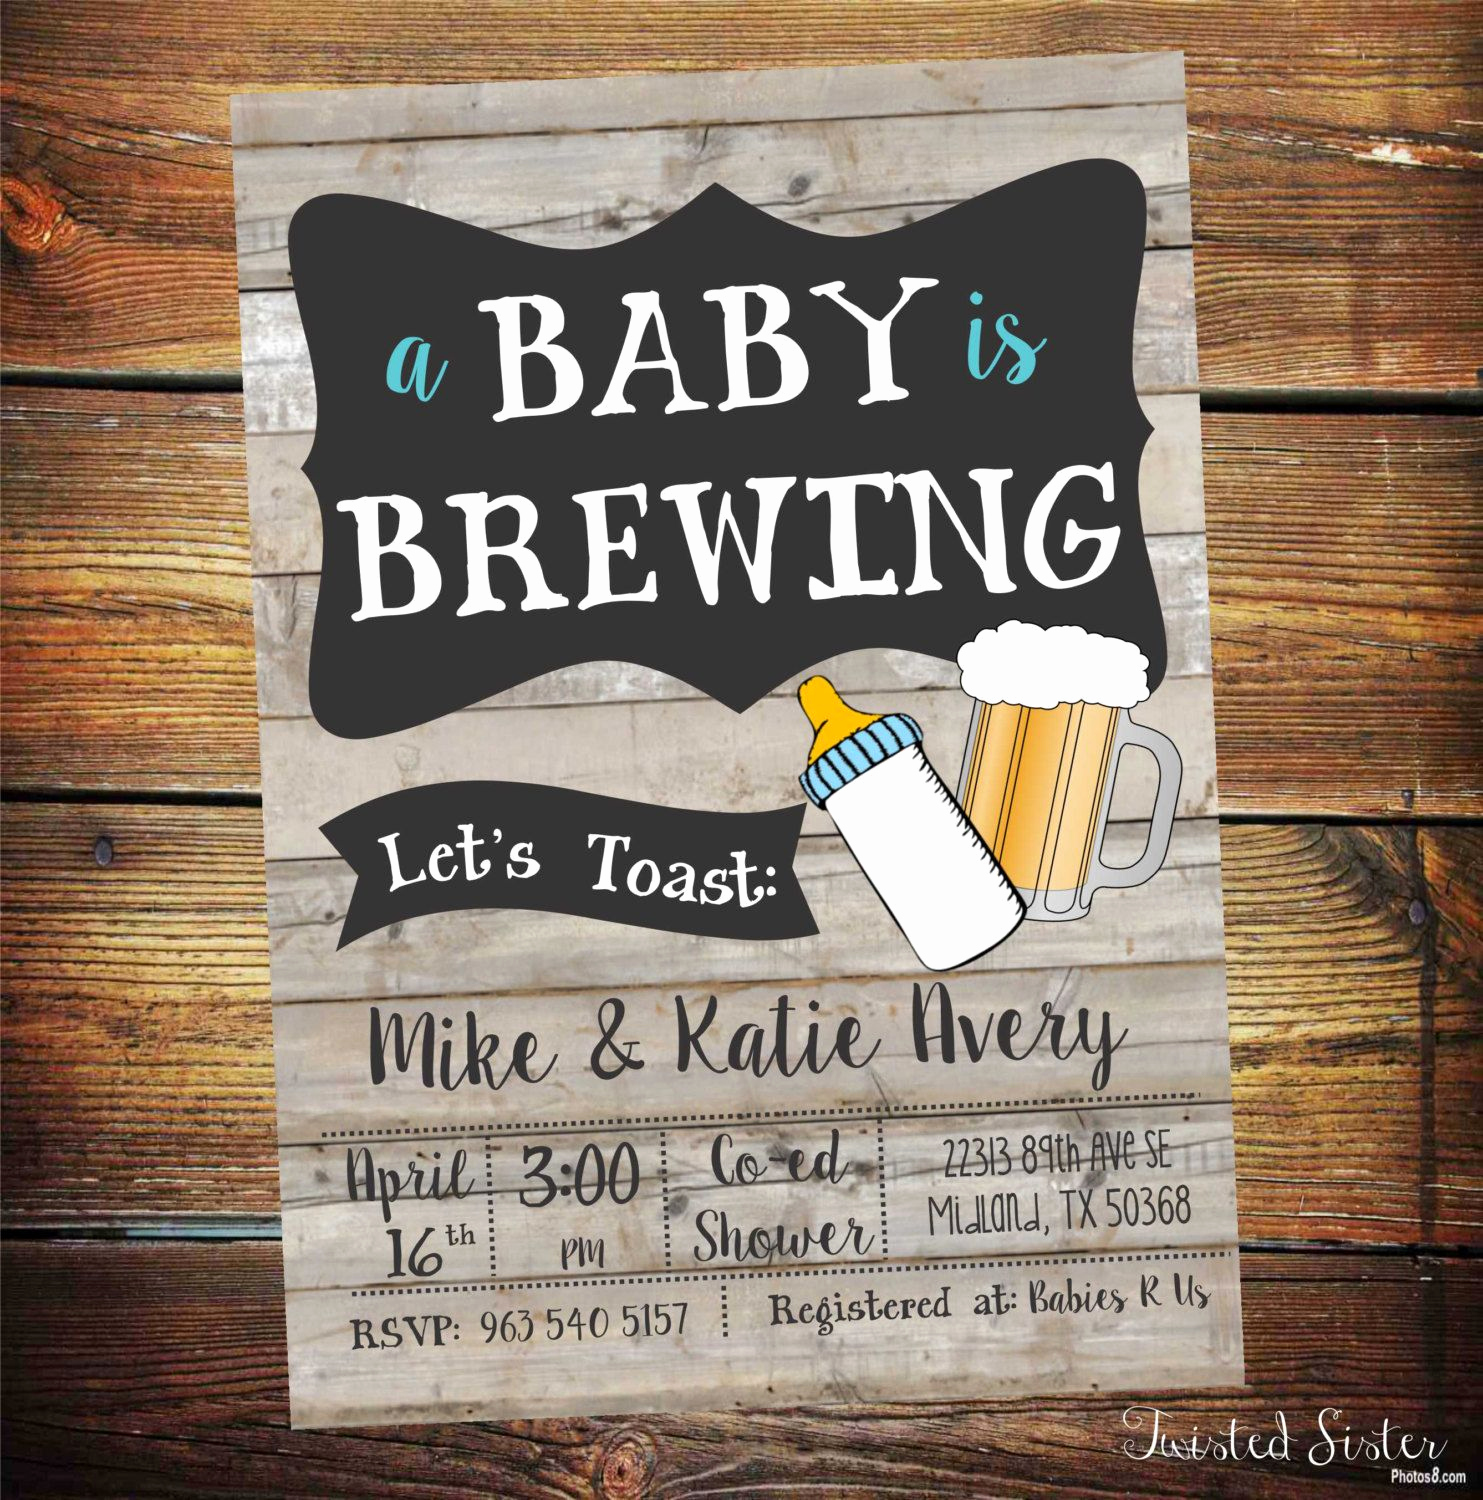 Co Ed Baby Shower Invitation Unique A Baby is Brewing Invitation Beer Baby Shower Invitation